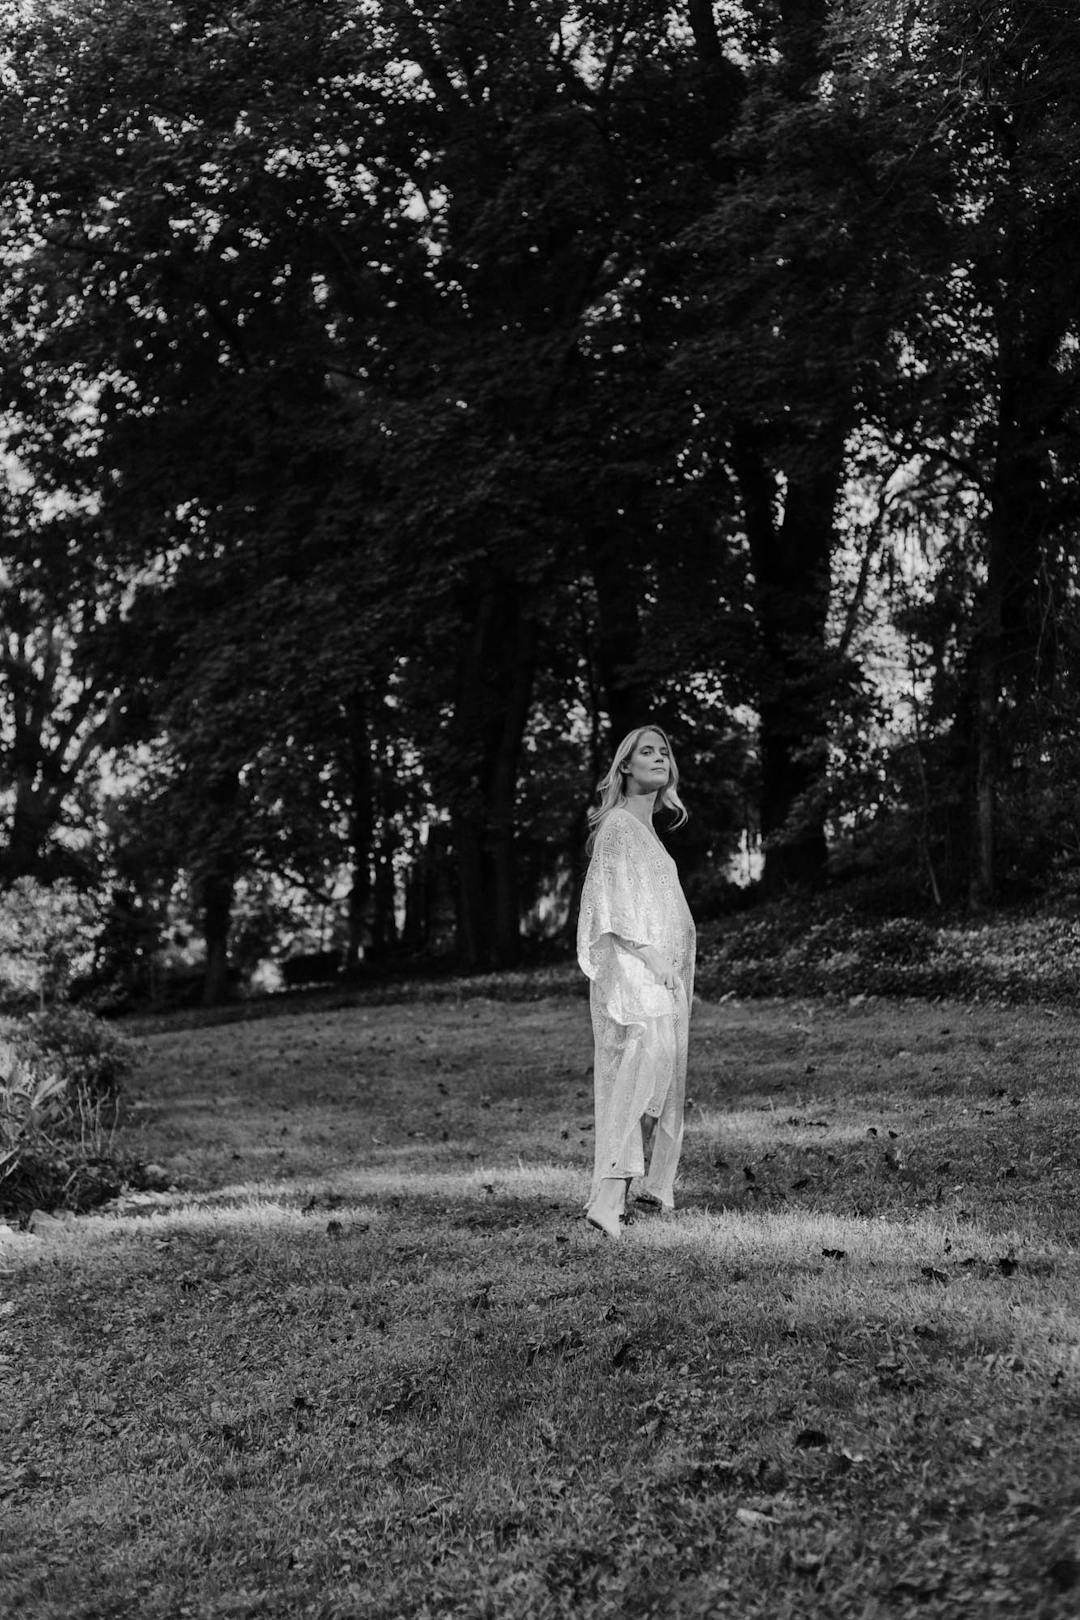 black and white medium format maternity portrait of woman in white dress walking in nature from a distance